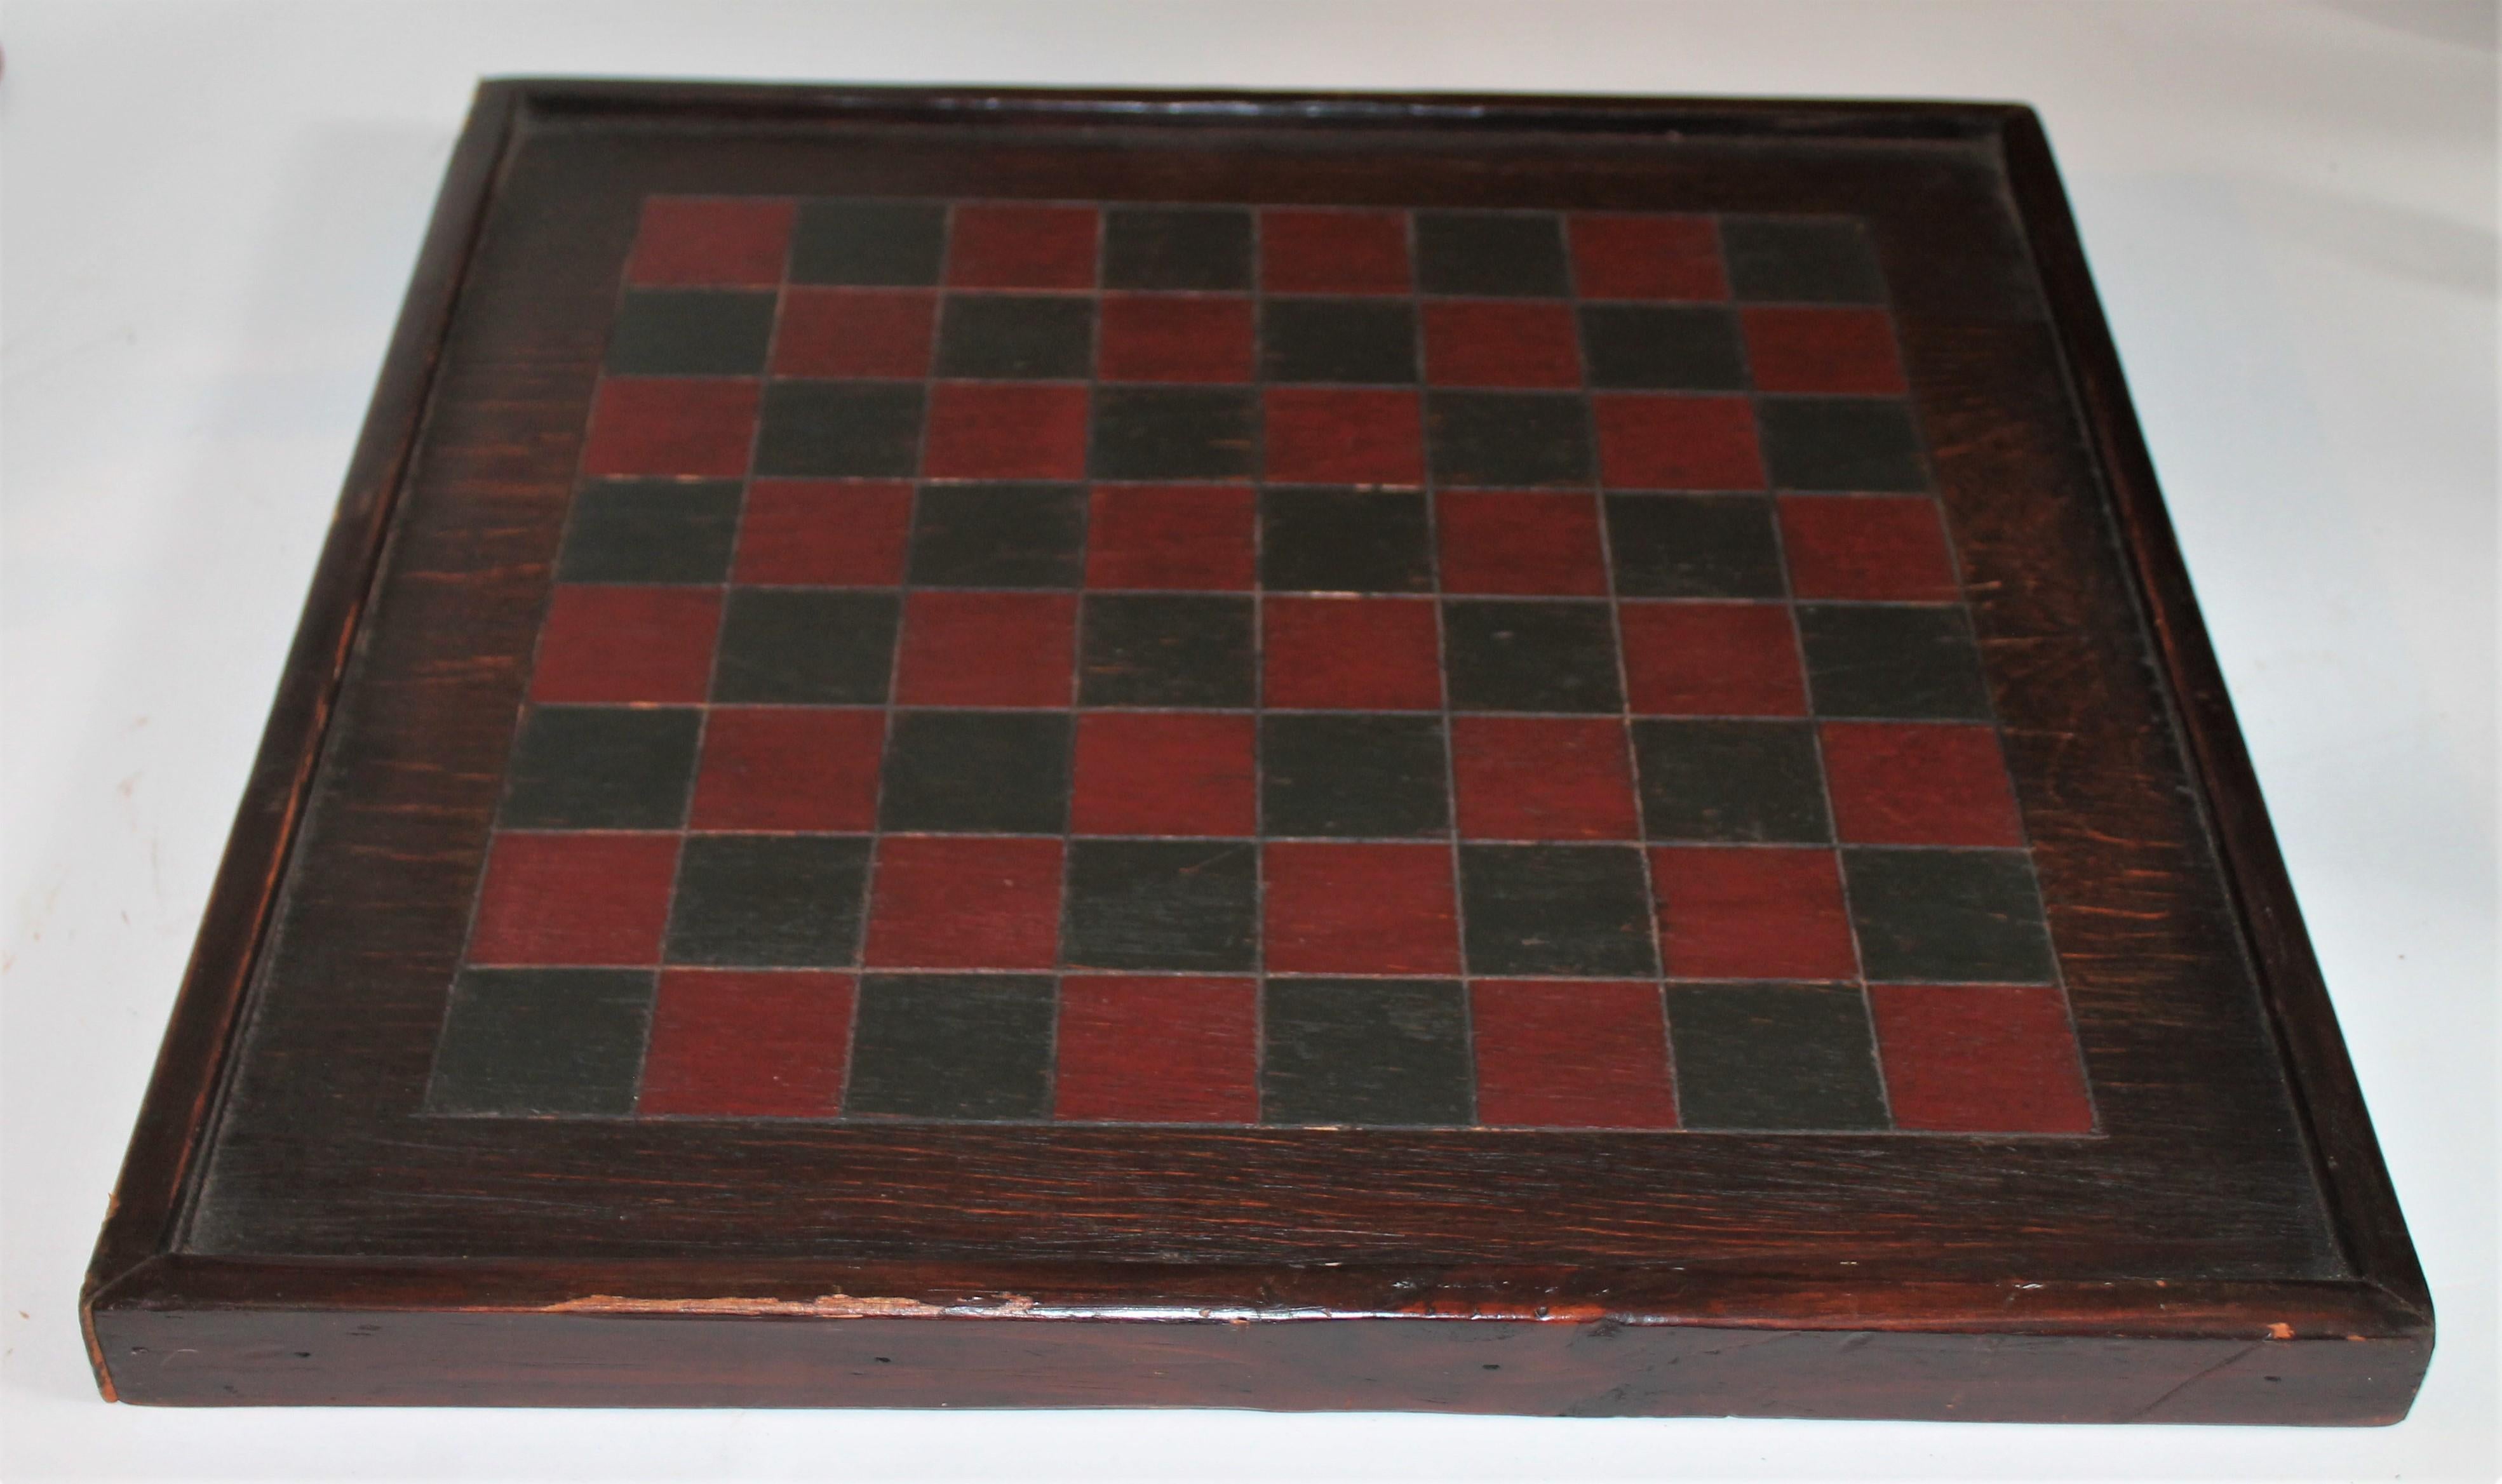 19th century game board in original painted surface from Pennsylvania. The paint is fantastic.